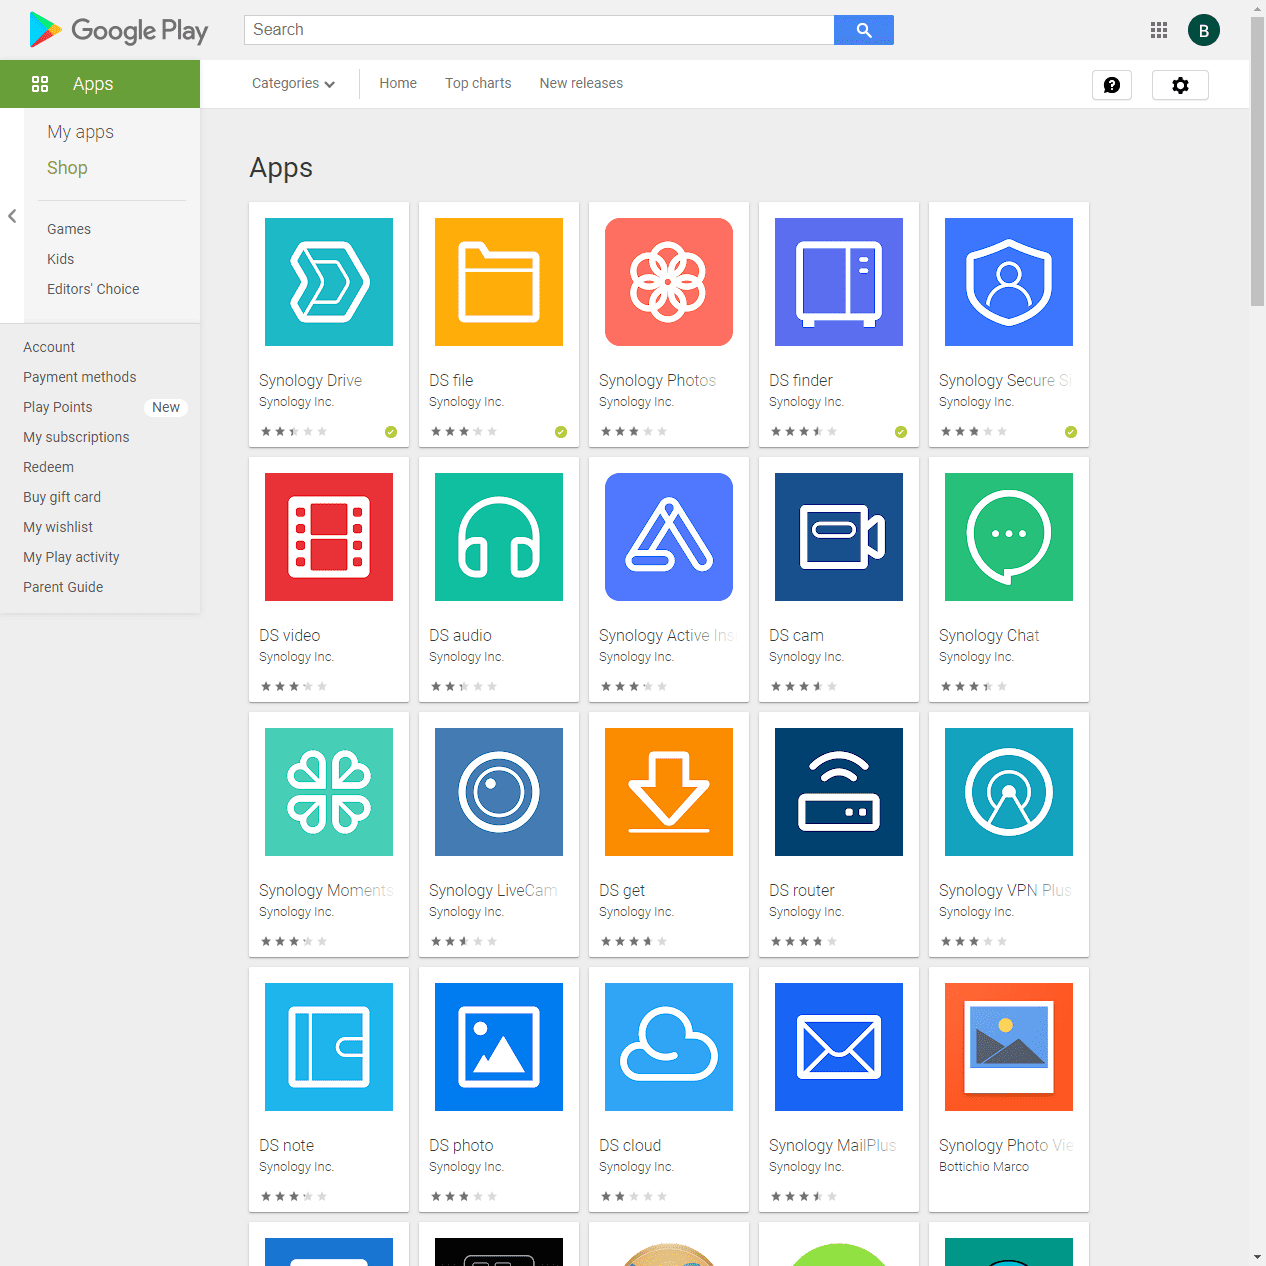 Synology mobile apps in the Google Play store